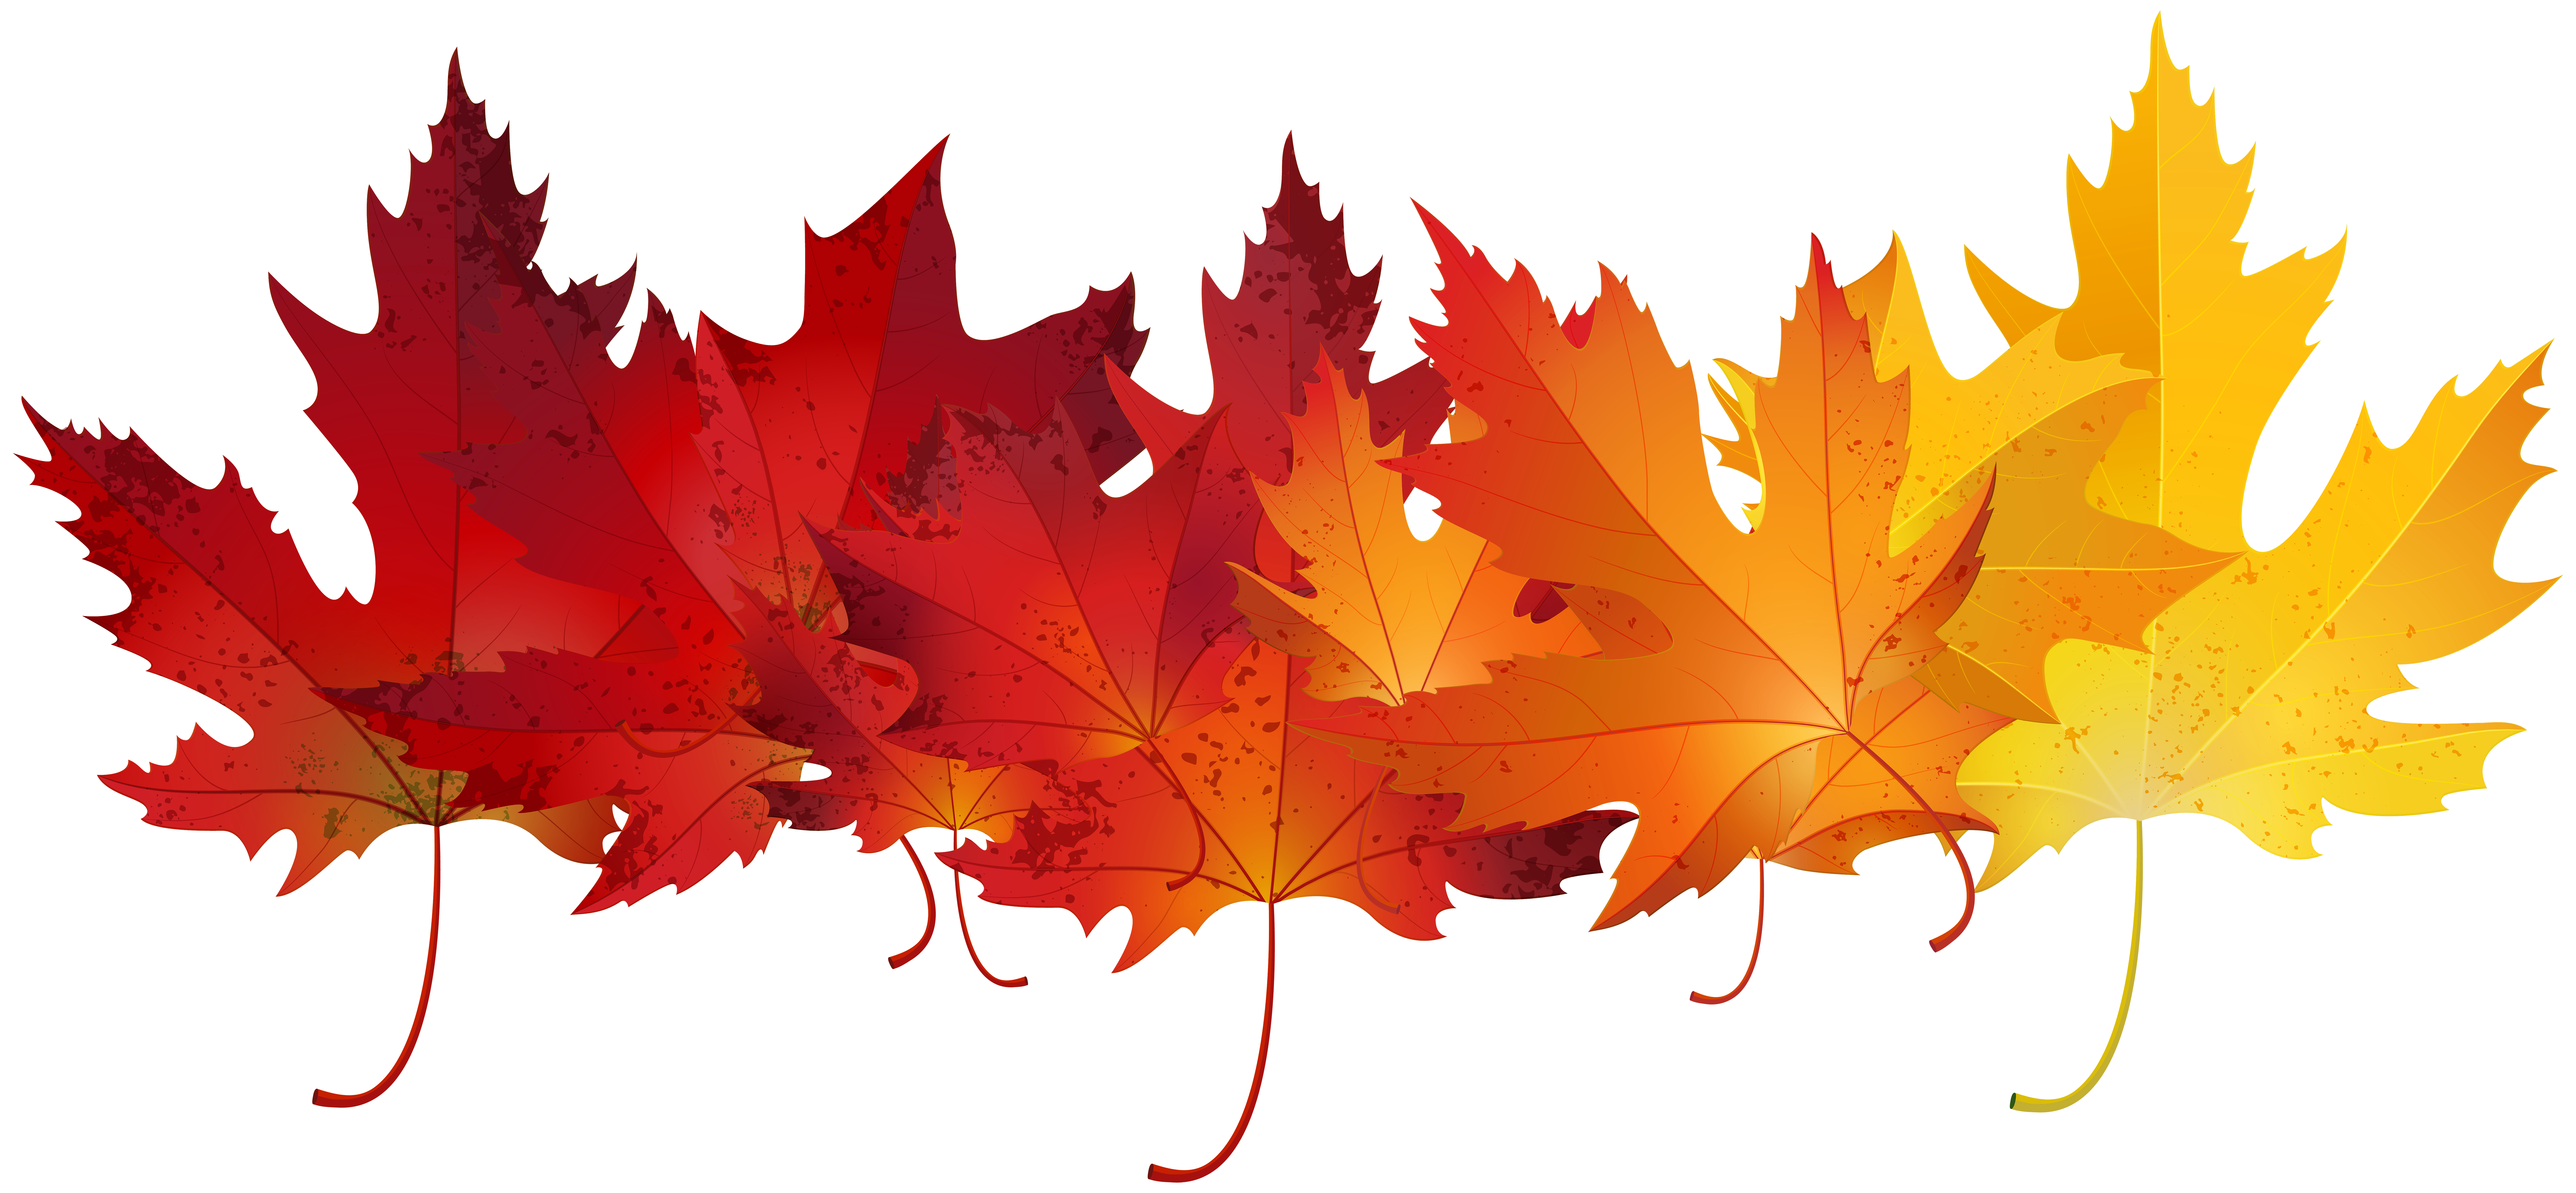 Red Autumn Leaves Transparent Clip Art Image​ | Gallery Yopriceville -  High-Quality Free Images and Transparent PNG Clipart